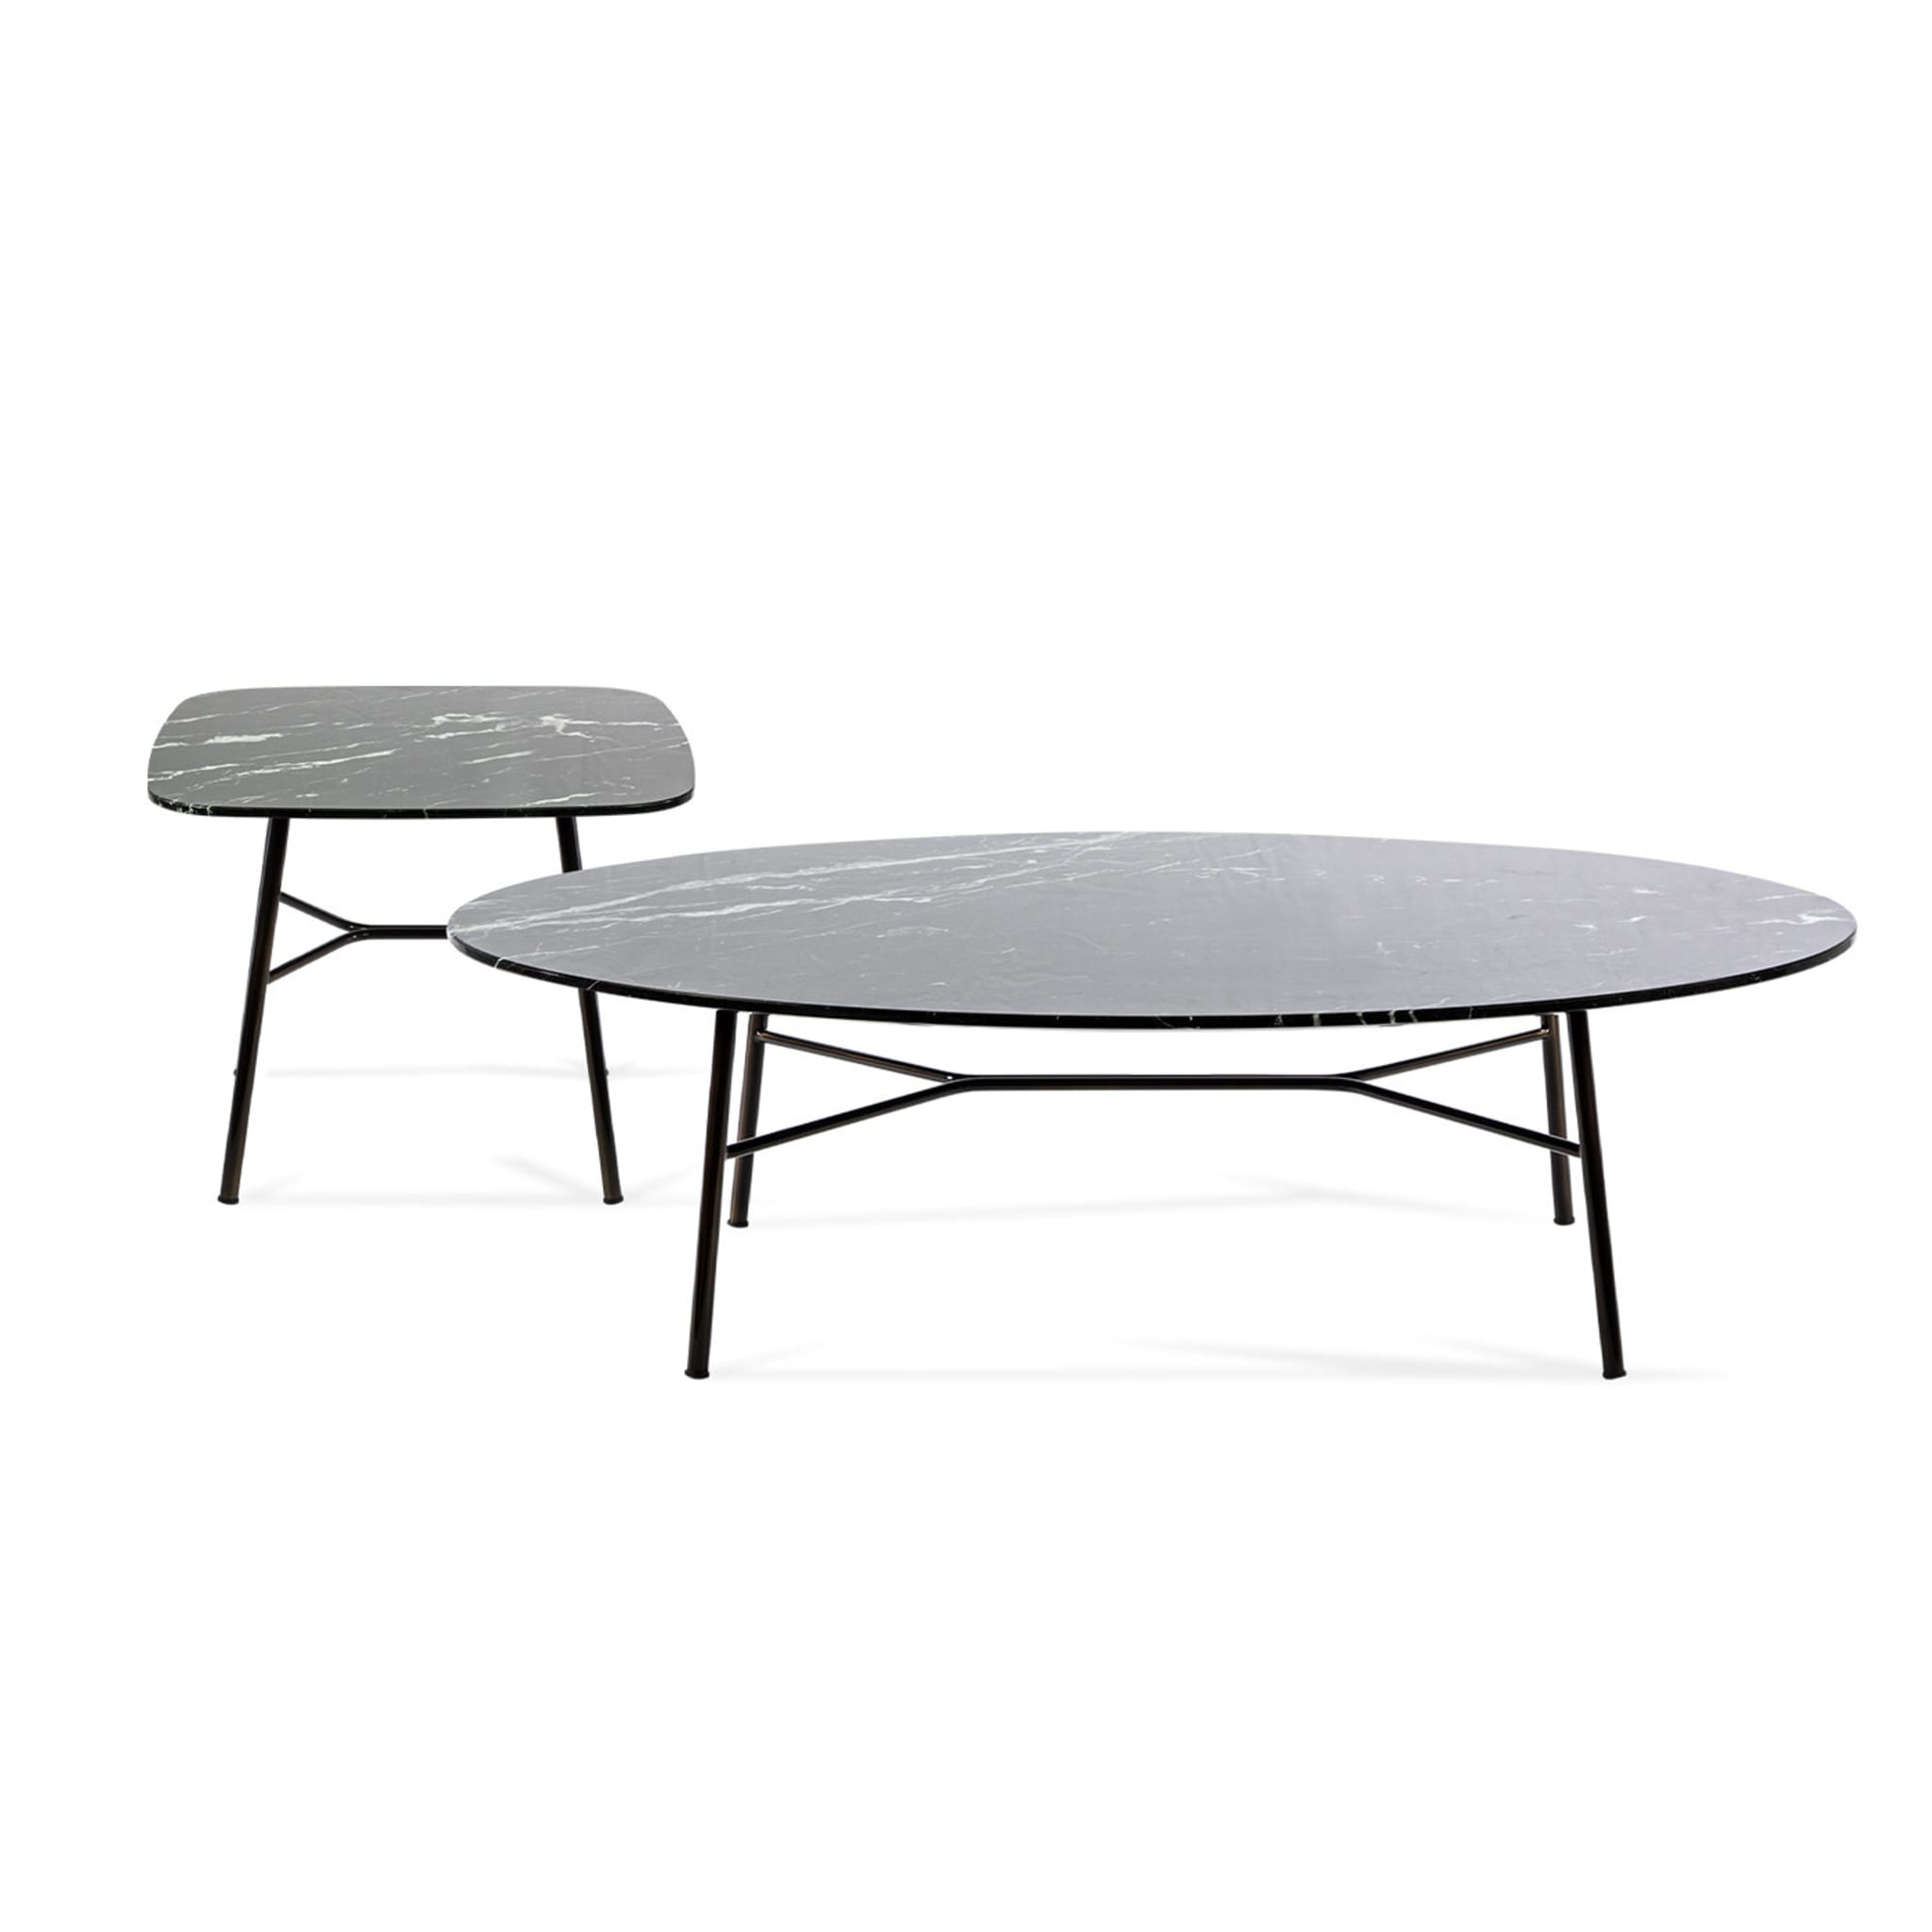 Yuki Oval Coffee Table with Black Marquinia Top # 1 by Ep Studio - Alternative view 2